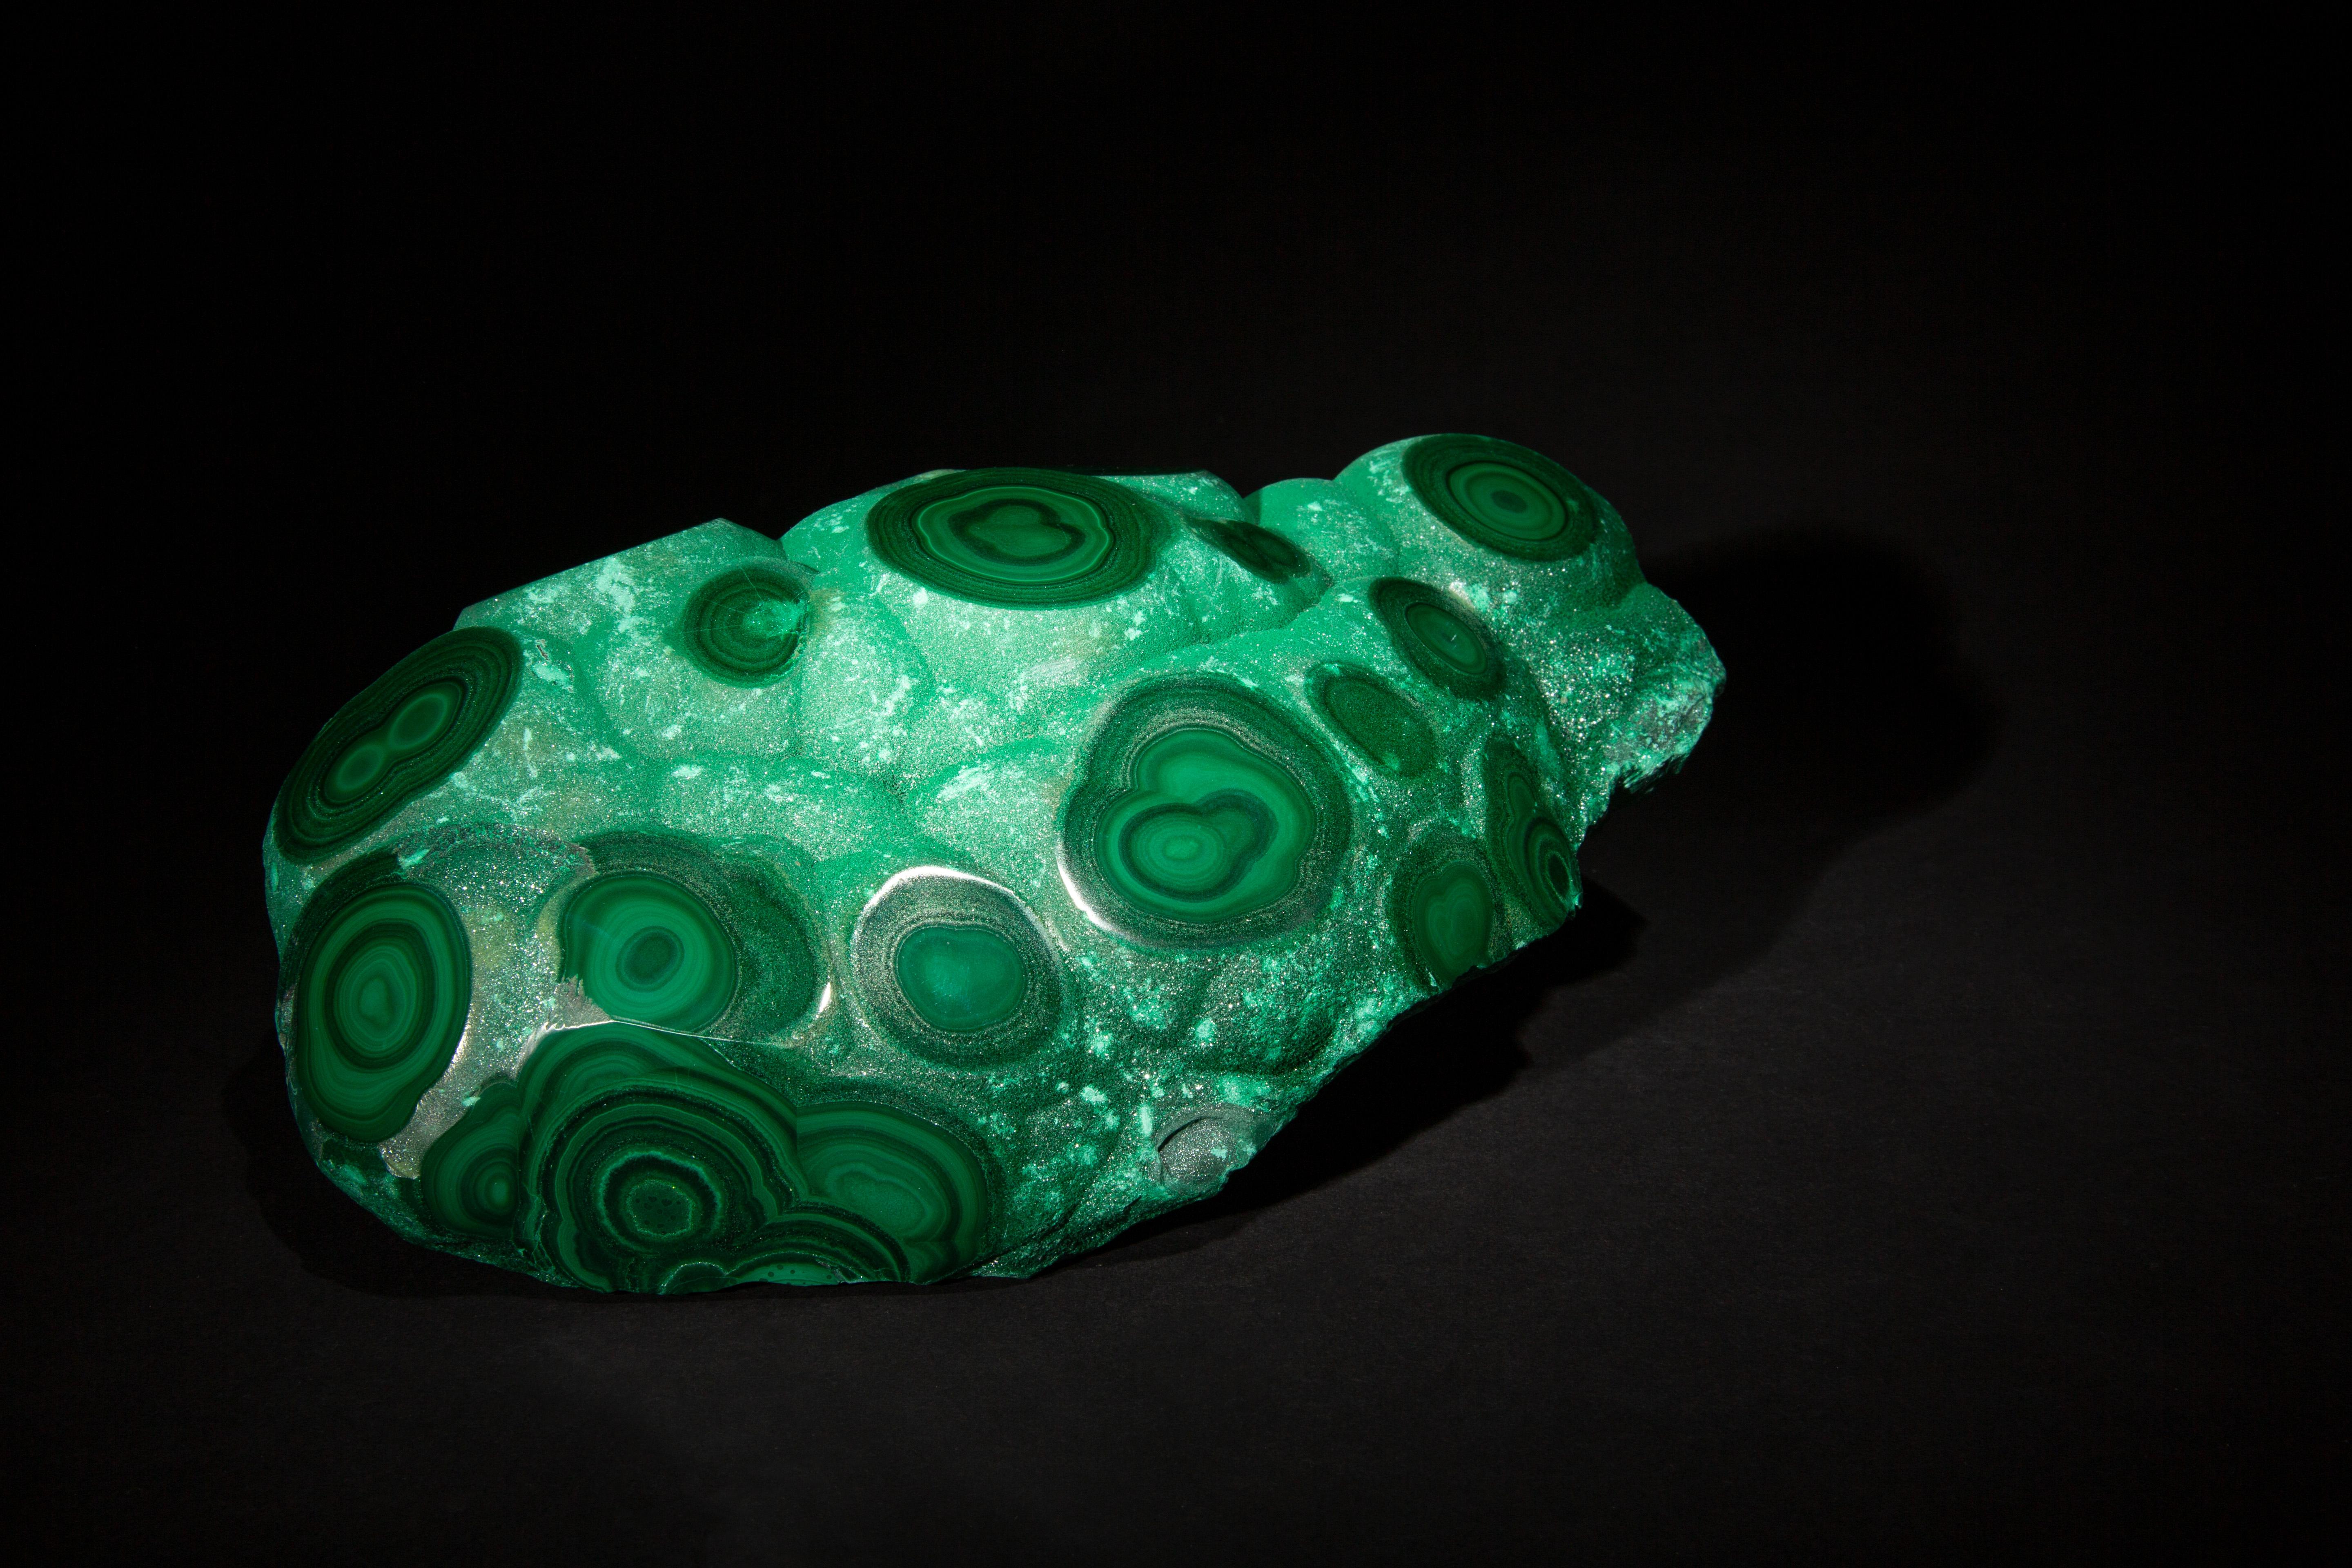 This exquisite malachite specimen, measuring 9 inches by 6 inches by 3.25 inches, showcases the intricate beauty of nature's artistry. Renowned for its vibrant green hues and unique banded patterns, each piece of malachite is a testament to the